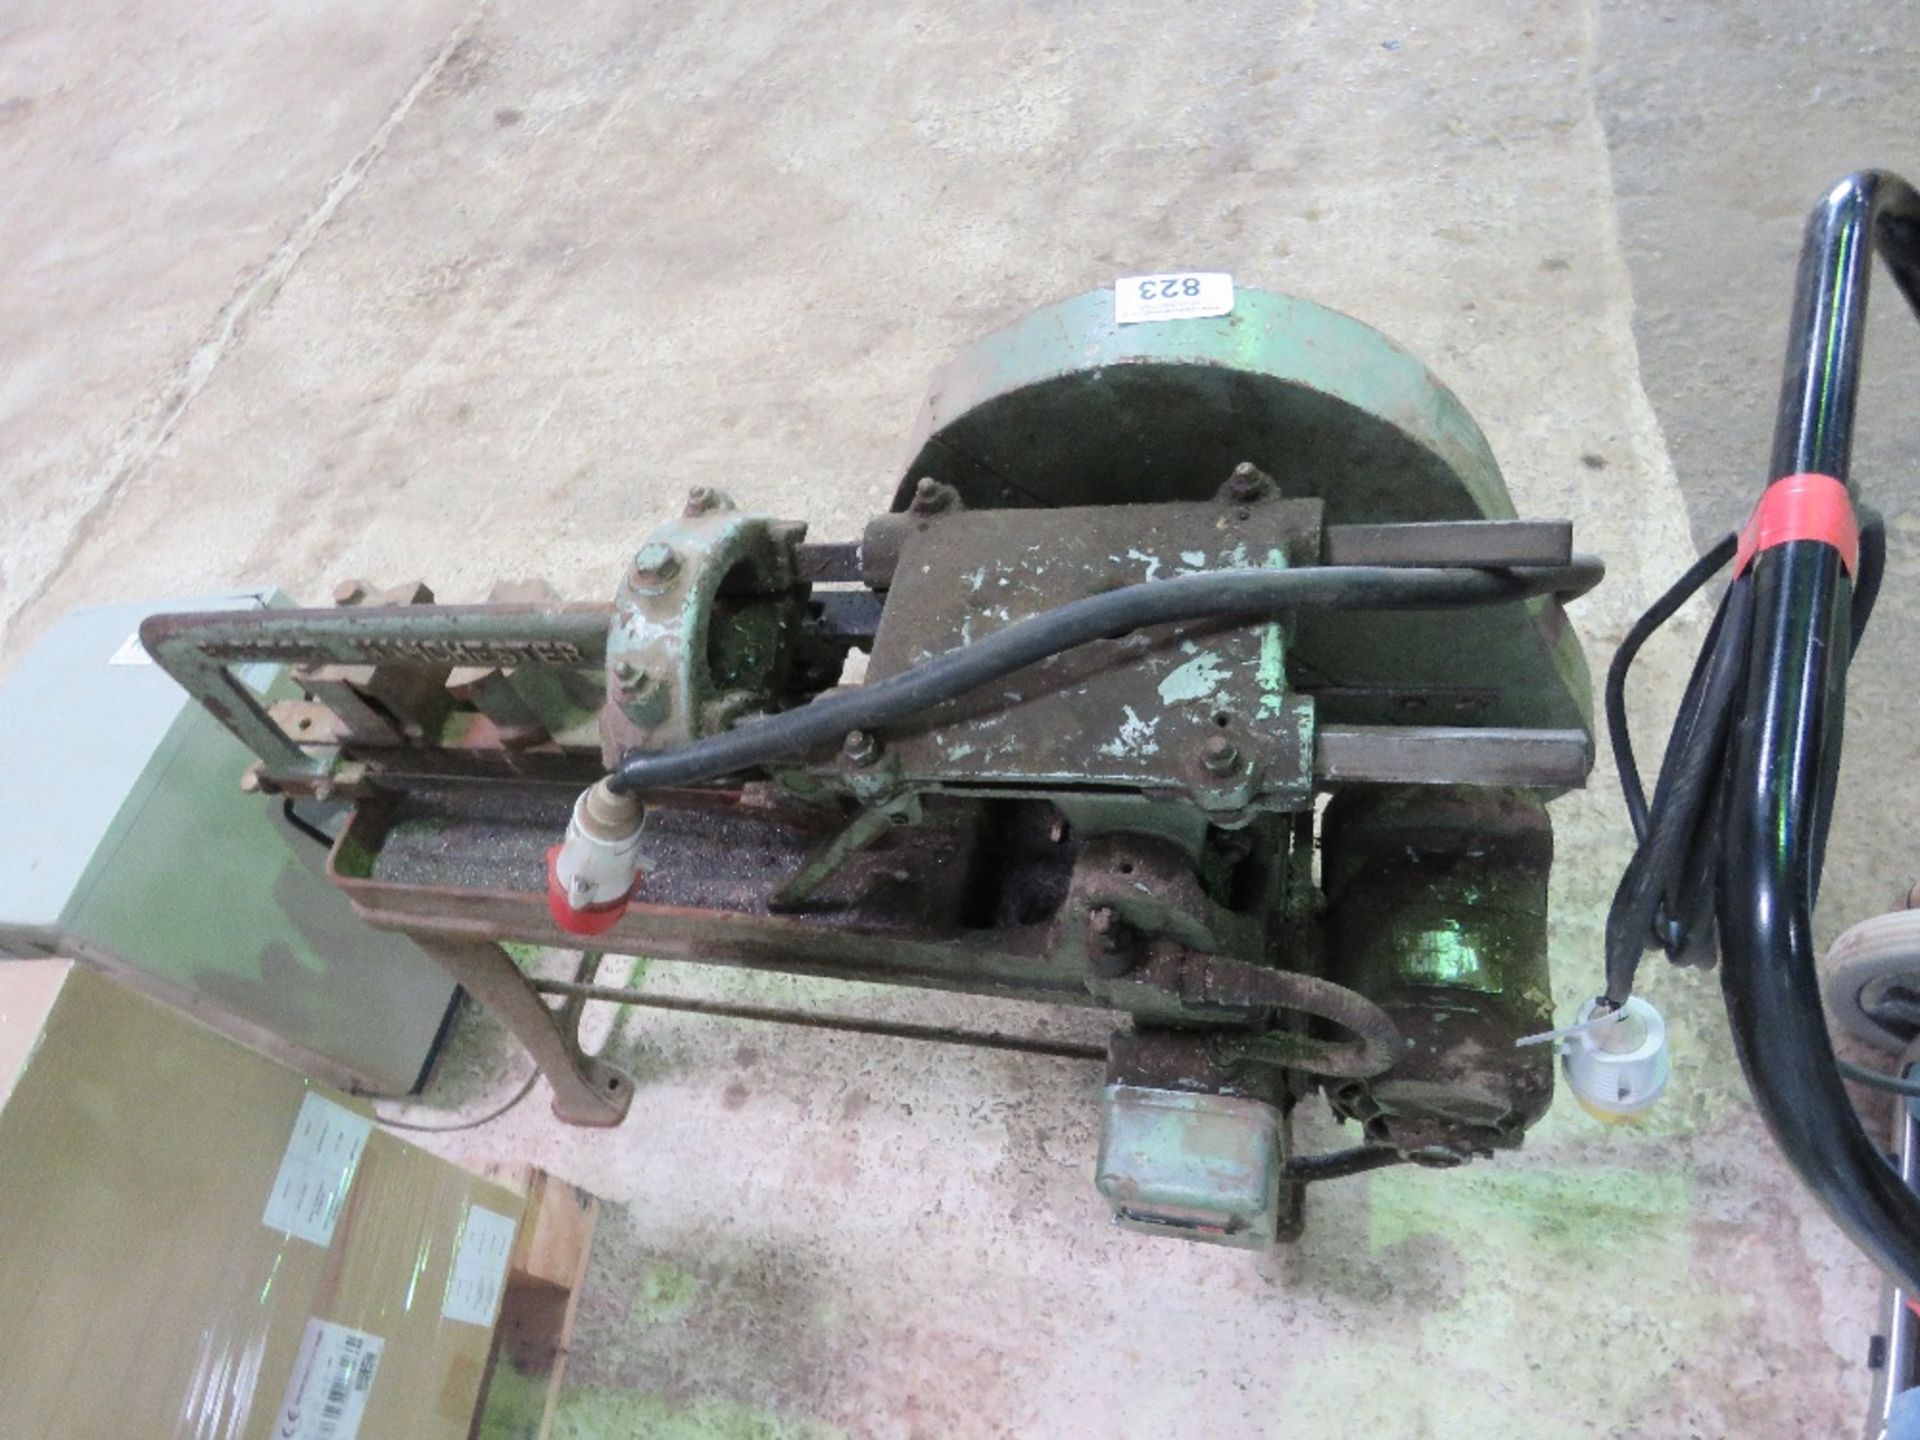 WORKSHOP POWER HACKSAW, 3 PHASE POWERED.....THIS LOT IS SOLD UNDER THE AUCTIONEERS MARGIN SCHEME, TH - Image 2 of 3